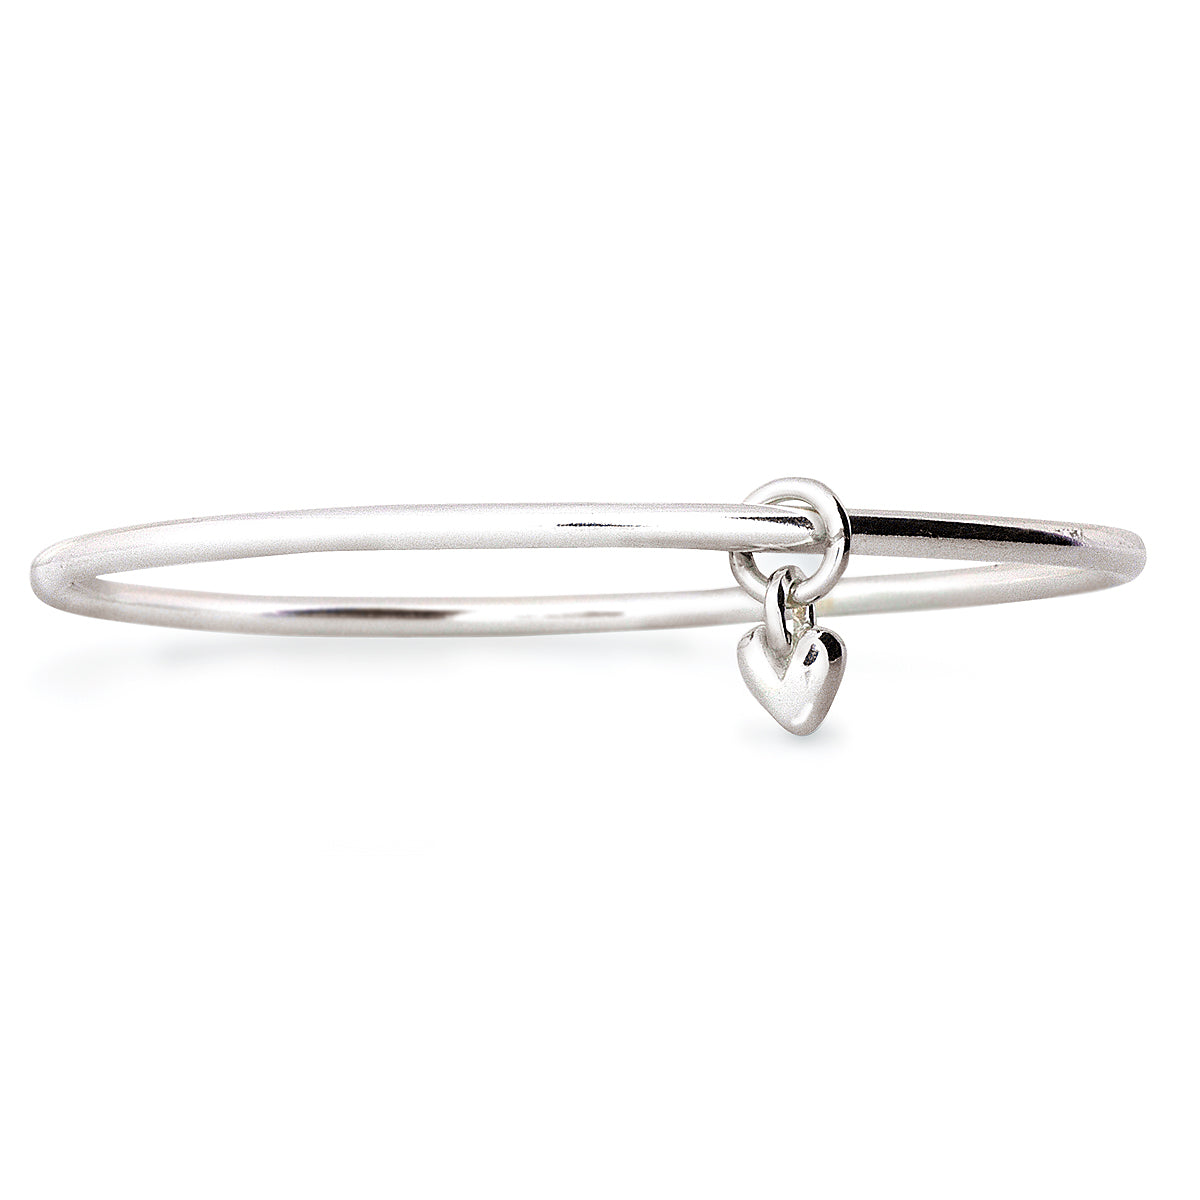 Recycled silver heart charm bangle made in UK by Scarlett Jewellery